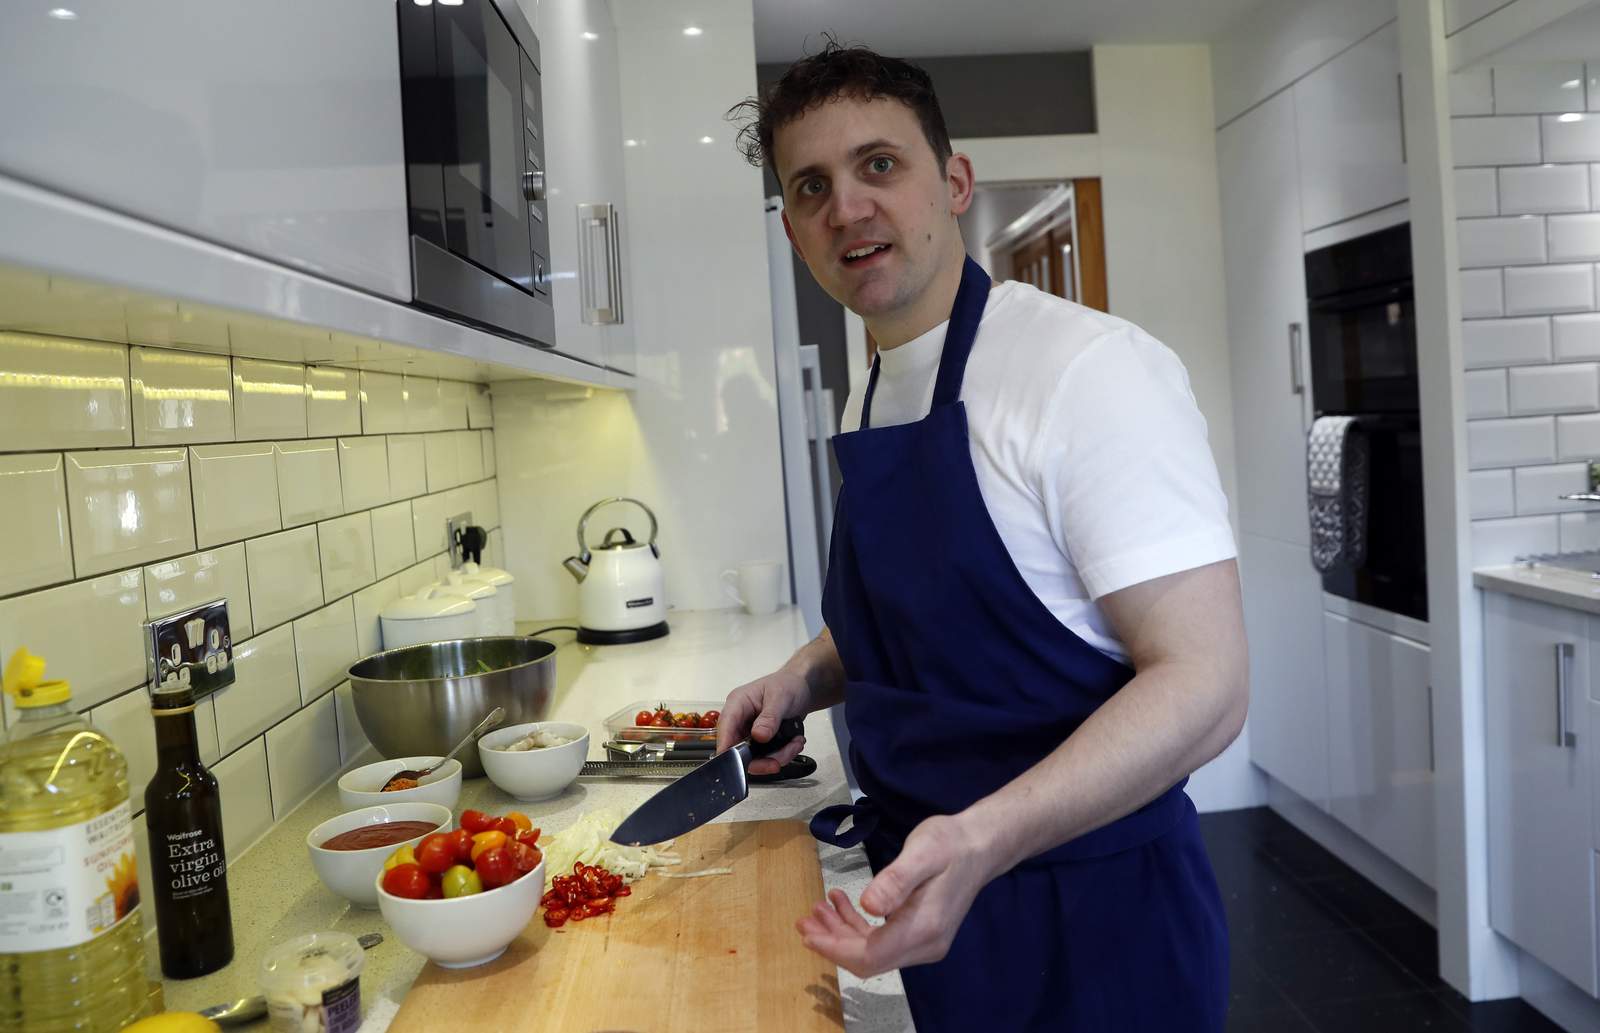 Philip's legacy lives in chef who traded prison for kitchen